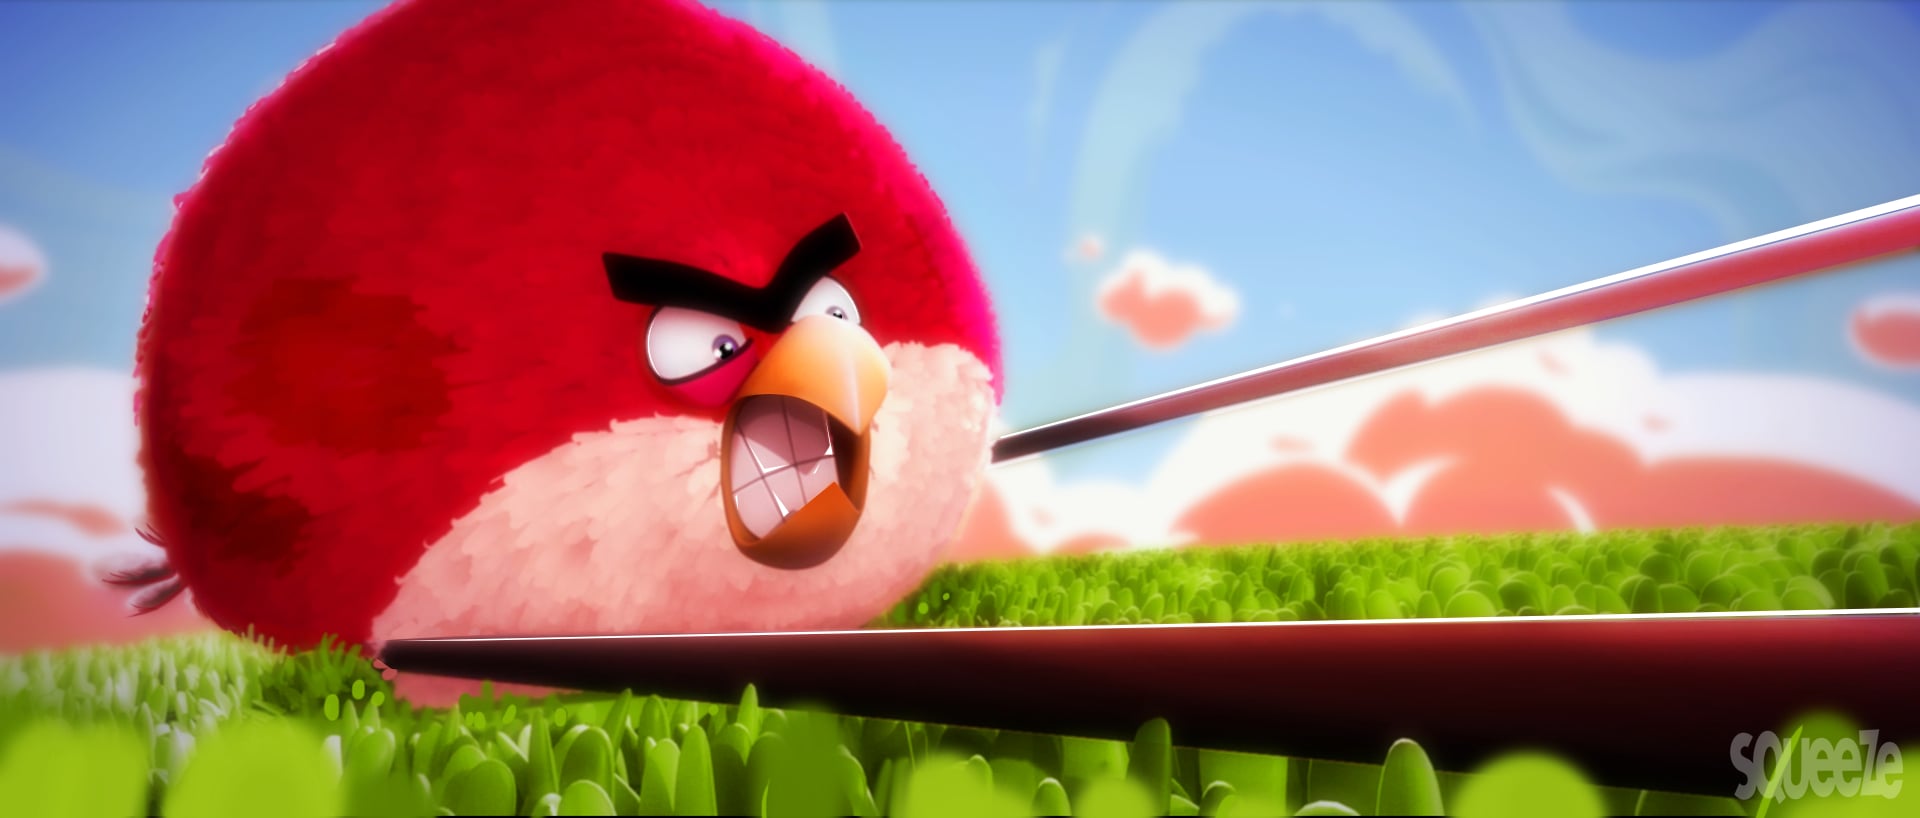 Angry birds 3d. Angry Birds 3. Энгри бердз 3д пародия. Angry Birds анимация. Angry Birds Bubble Trouble.